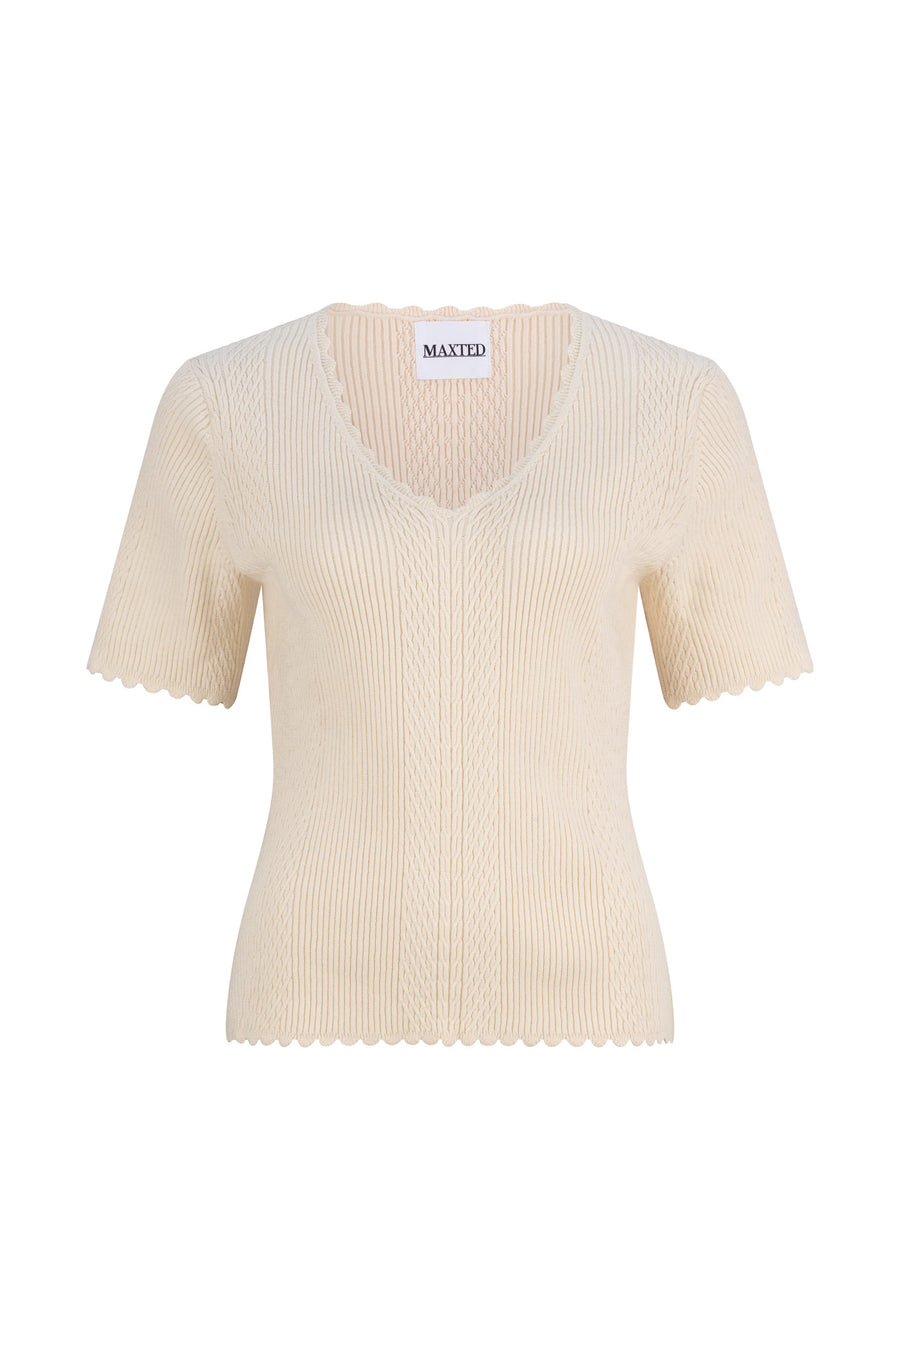 Ivory Scallop Knitted T-Shirt